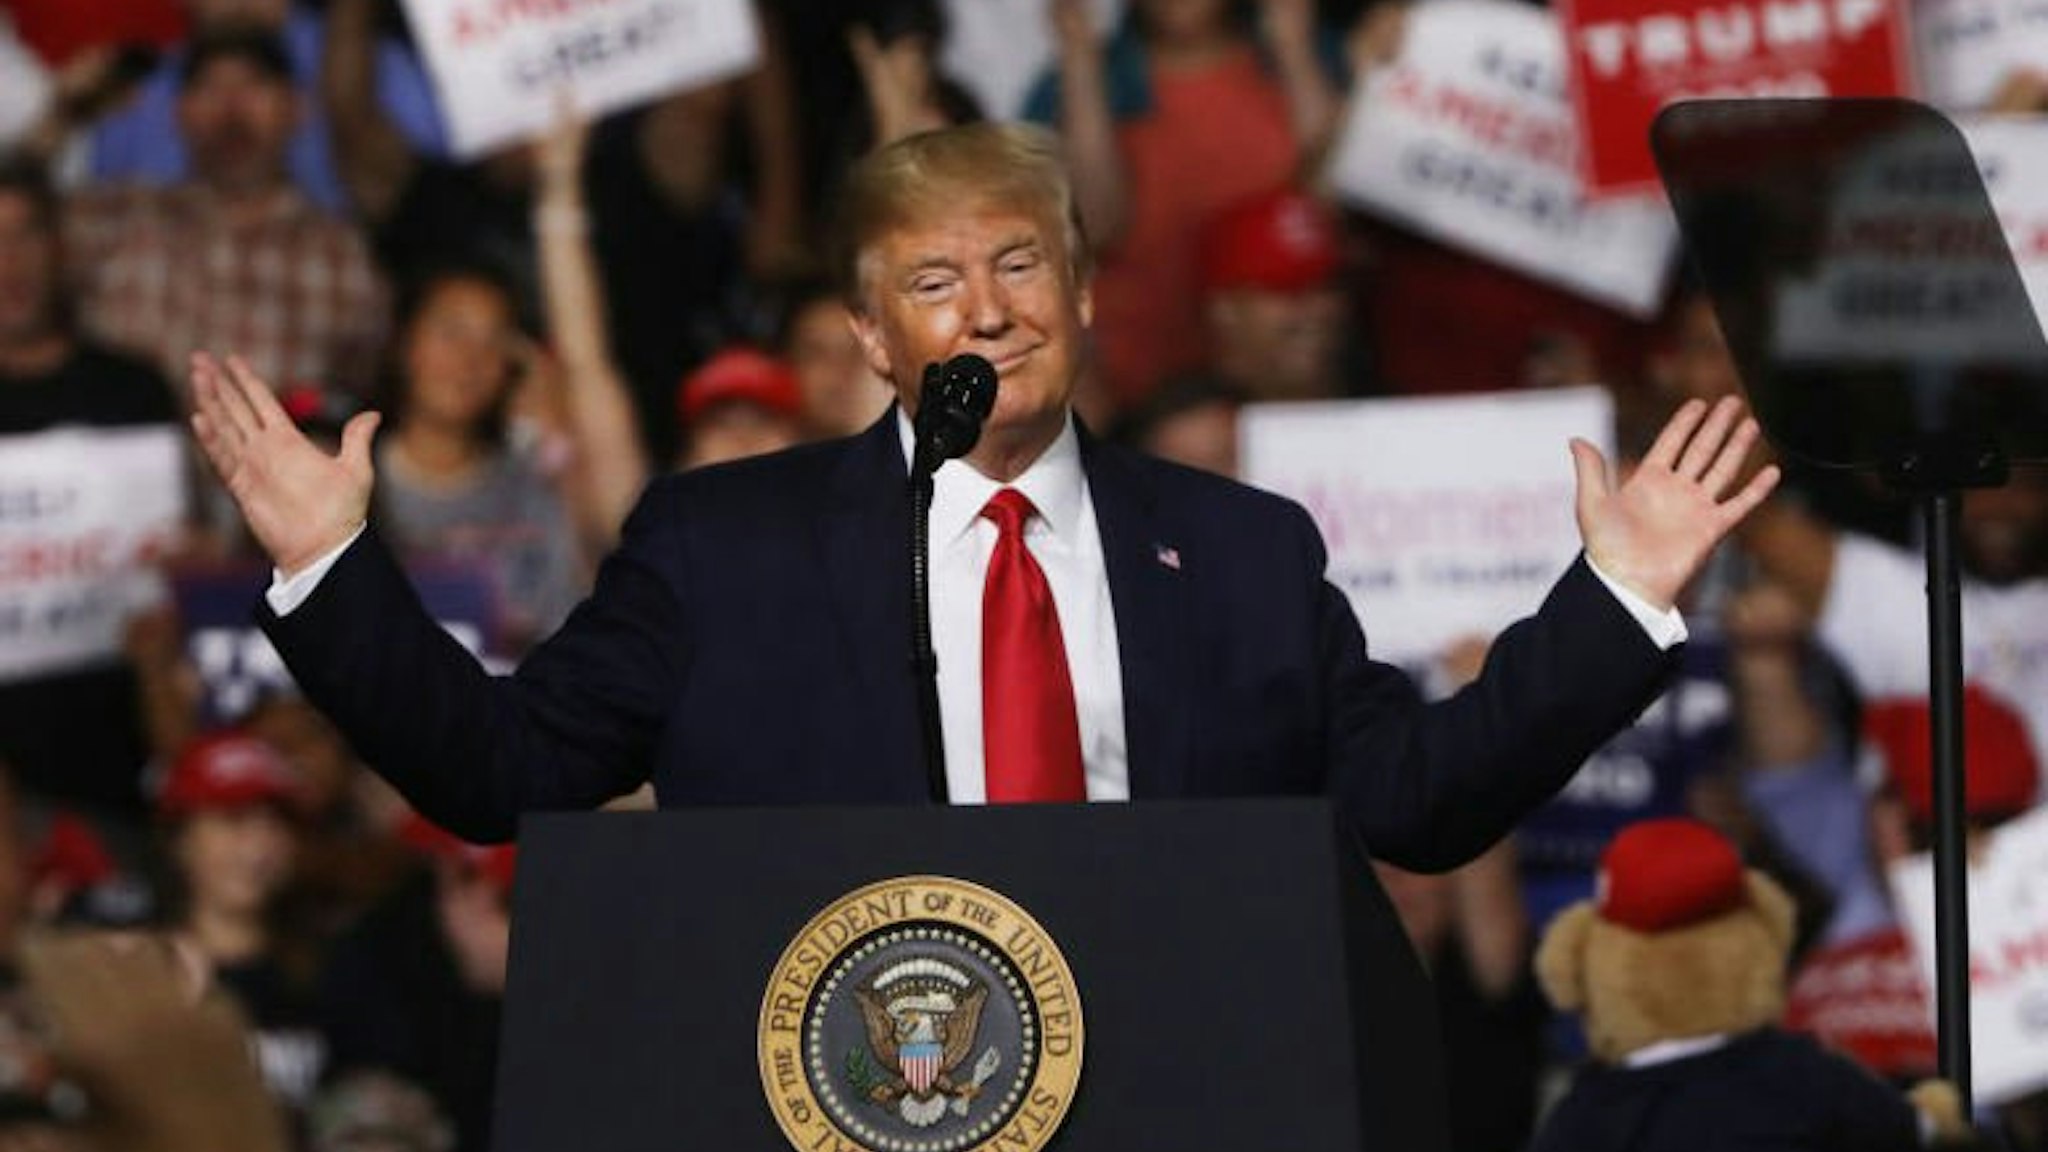 President Donald Trump speaks to supporters at a rally in Manchester on August 15, 2019 in Manchester, New Hampshire.